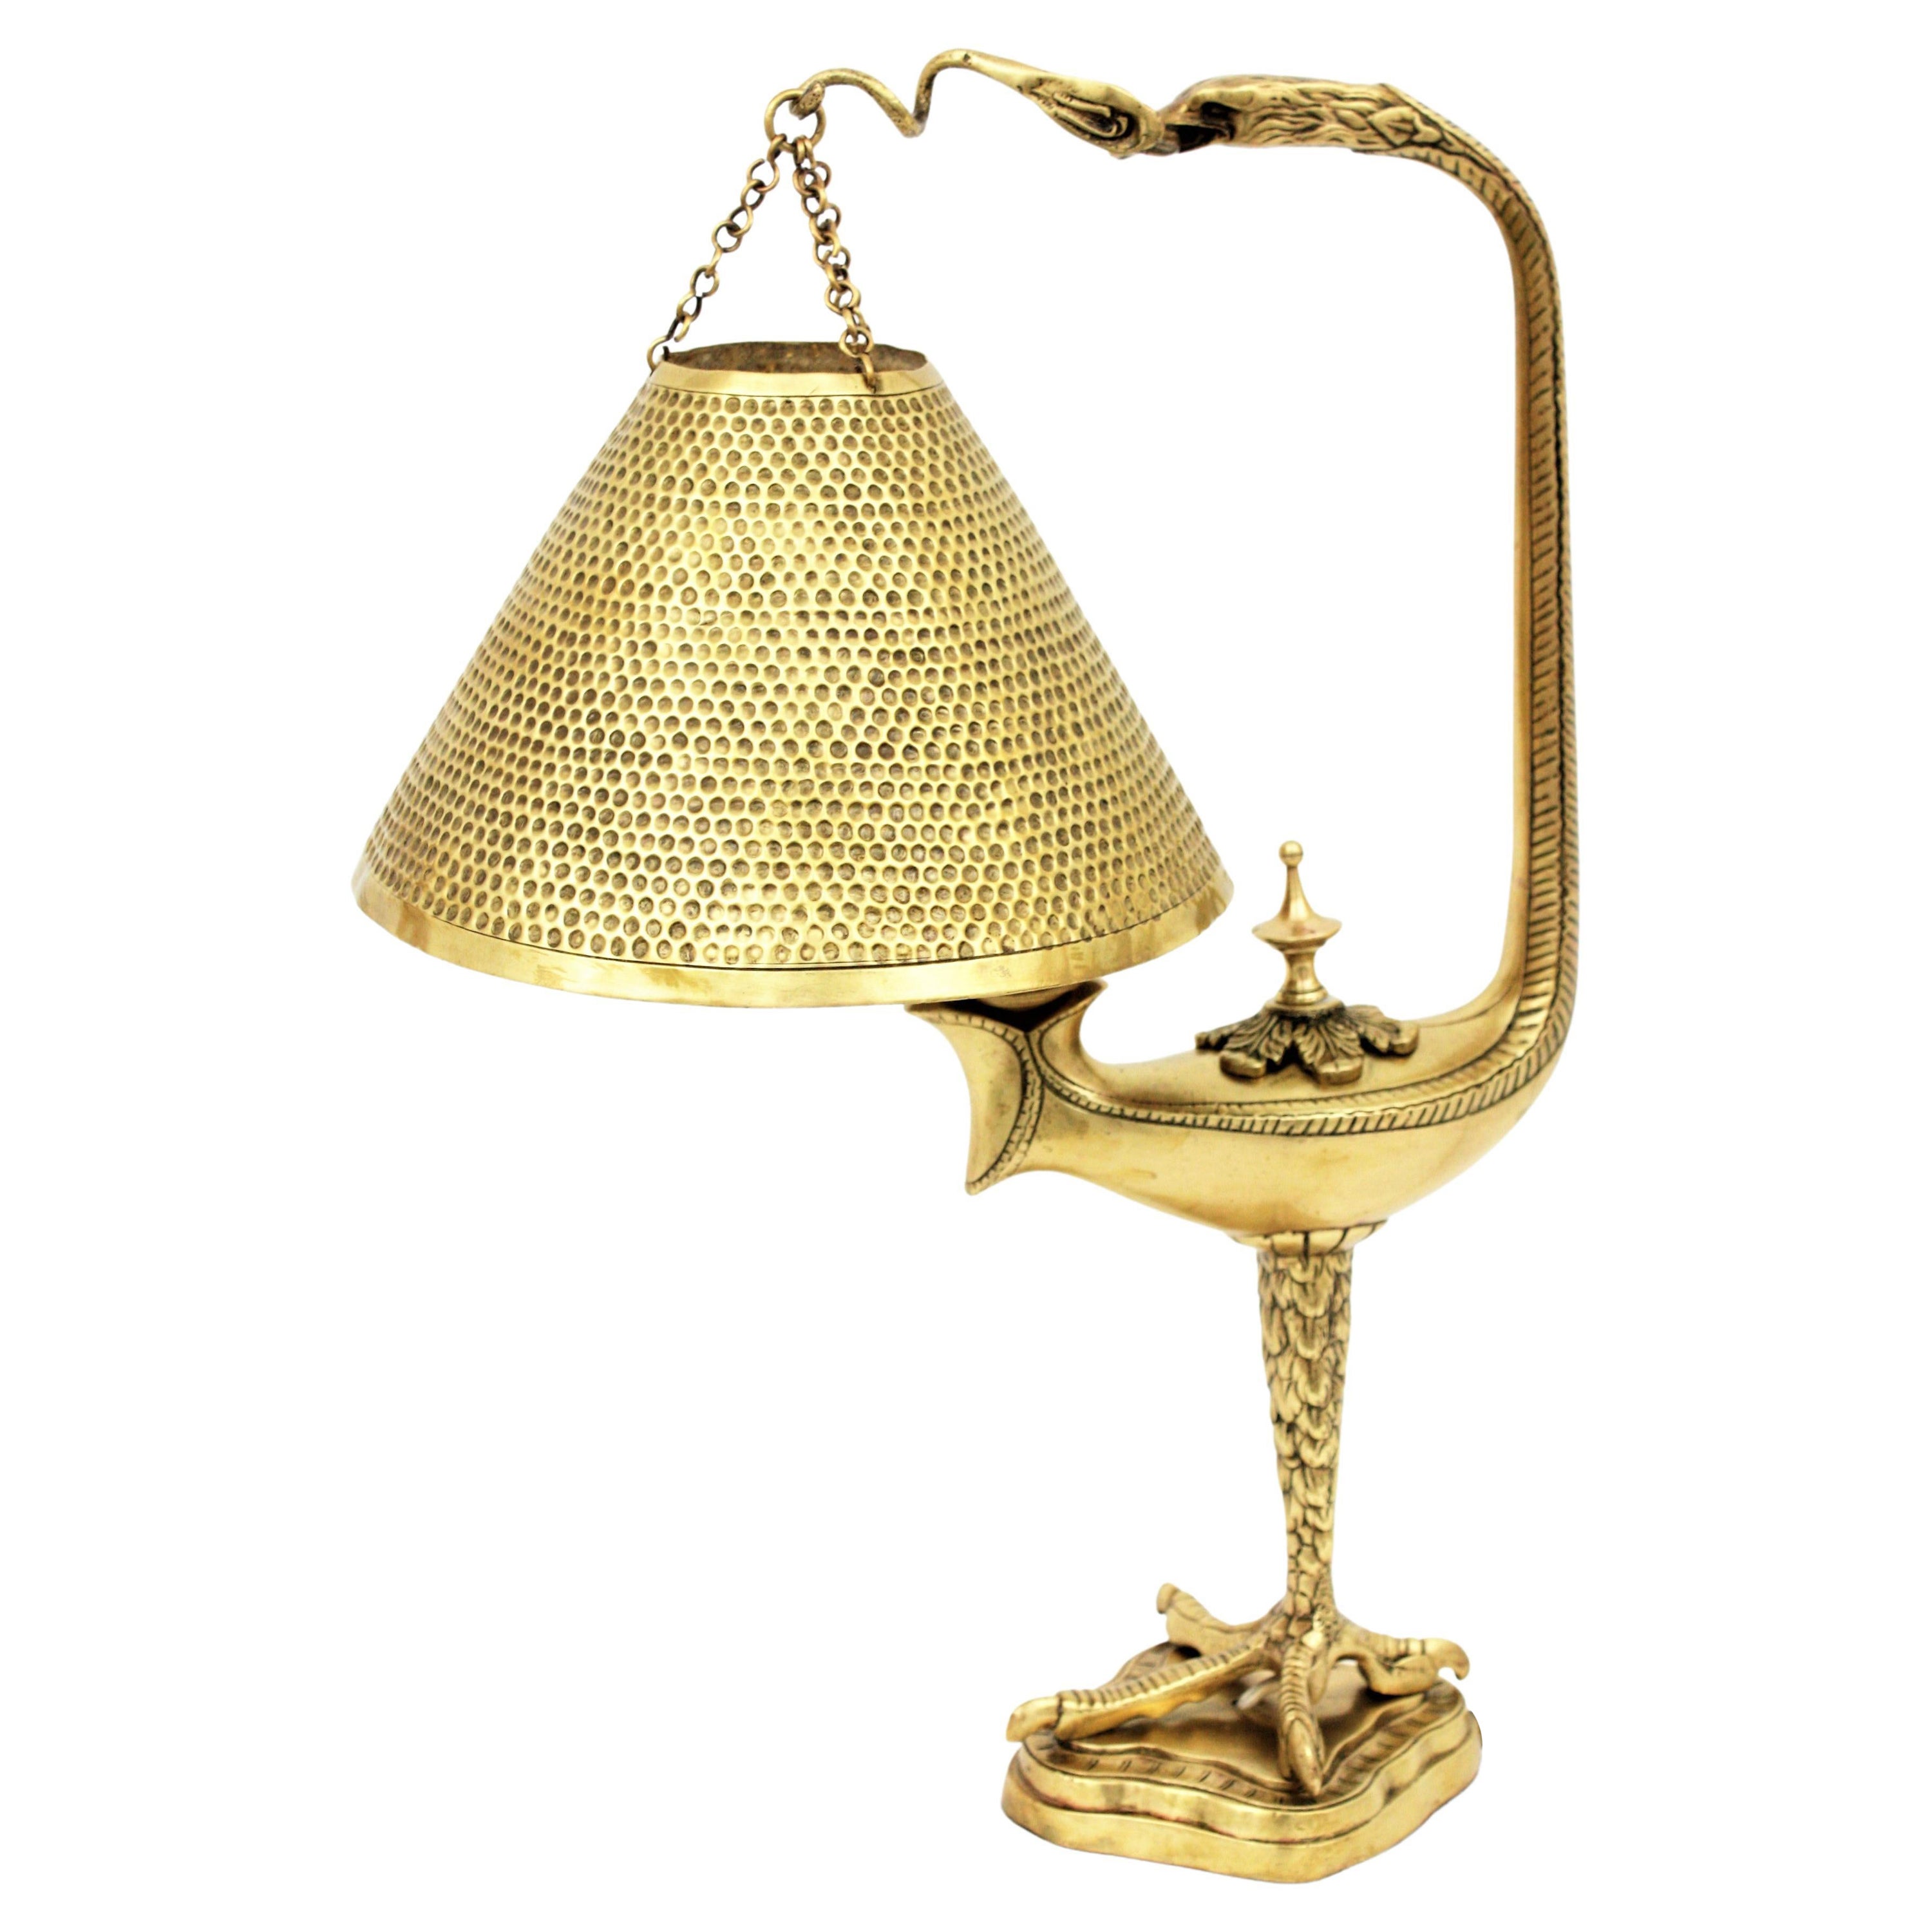 Art Deco desk lamp bird design, brass and brass Repoussé. France, 1920-1930s.
Solid brass desk lamp or table lamp featuring an eagle figure with a brass repoussé shade hanging from its beak. 
This unique table lamp features a gorgeous cast and